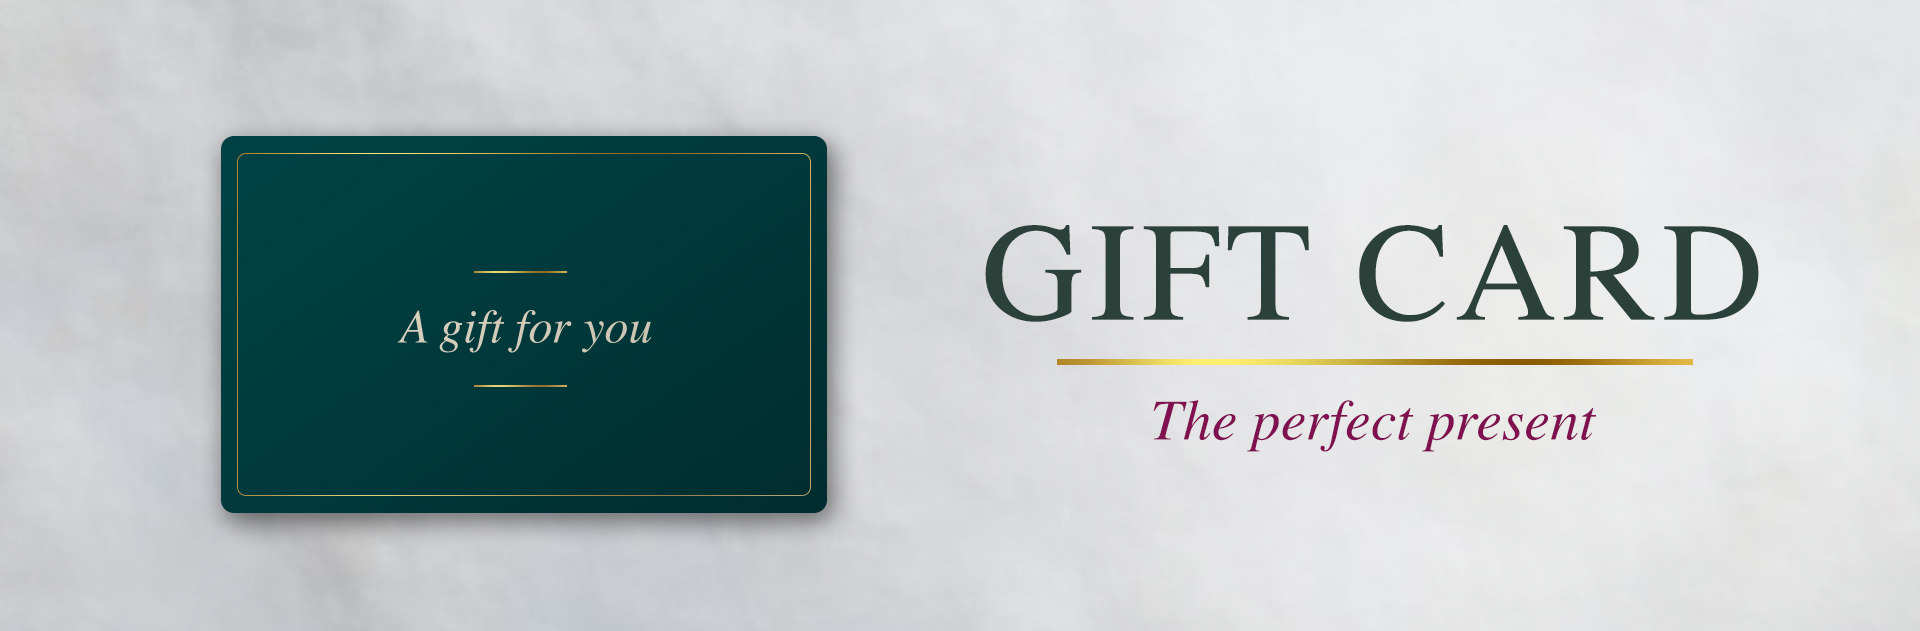 The Seven Stars Hotel Gift Card